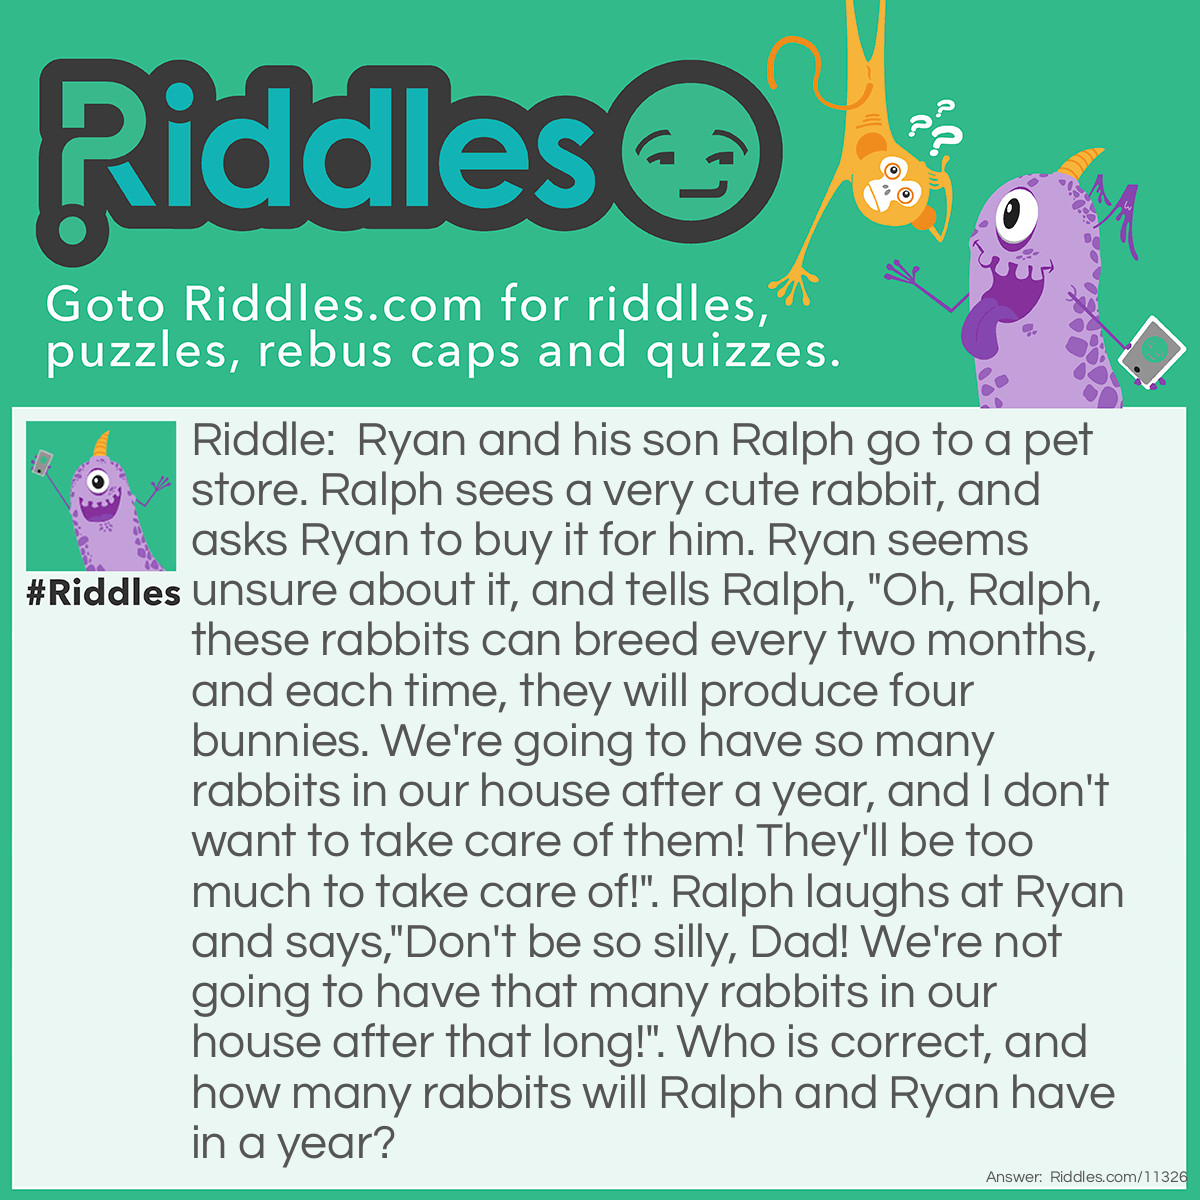 Riddle: Ryan and his son Ralph go to a pet store. Ralph sees a very cute rabbit, and asks Ryan to buy it for him. Ryan seems unsure about it, and tells Ralph, "Oh, Ralph, these rabbits can breed every two months, and each time, they will produce four bunnies. We're going to have so many rabbits in our house after a year, and I don't want to take care of them! They'll be too much to take care of!". Ralph laughs at Ryan and says,"Don't be so silly, Dad! We're not going to have that many rabbits in our house after that long!". Who is correct, and how many rabbits will Ralph and Ryan have in a year? Answer: Ralph is correct; they will only have one rabbit after a year. Ralph and Ryan only saw one rabbit in the pet store, but a single rabbit simply can't breed on its own; it takes TWO rabbits to breed. Therefore, after one year, the two of them will only have that one rabbit…if they choose to buy it, that is.